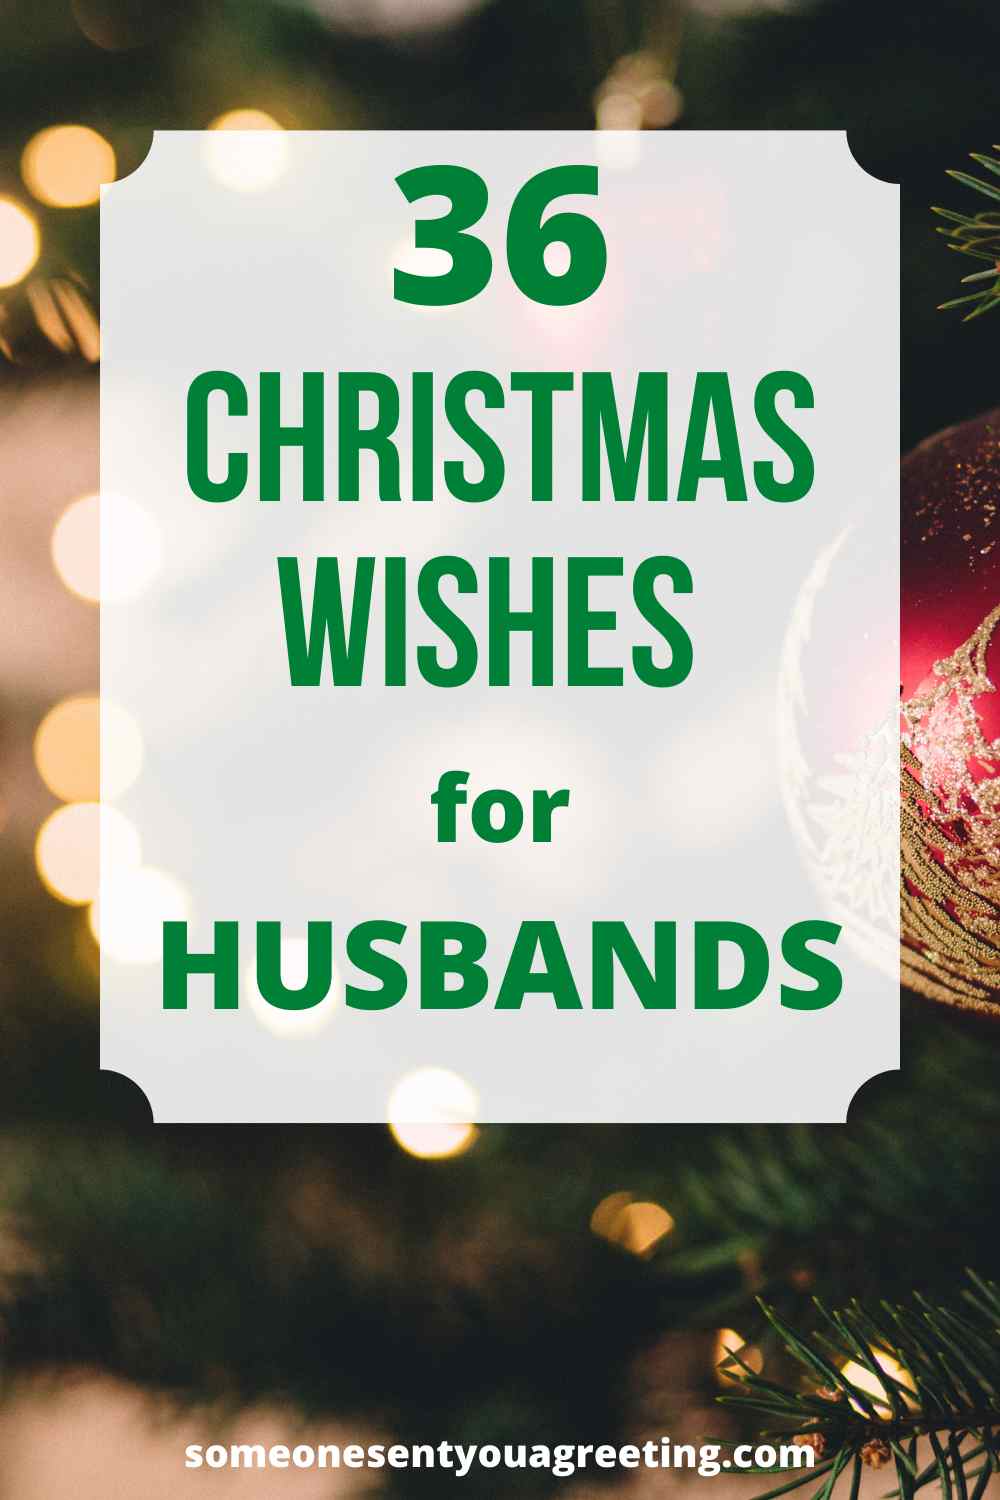 Christmas wishes for husband